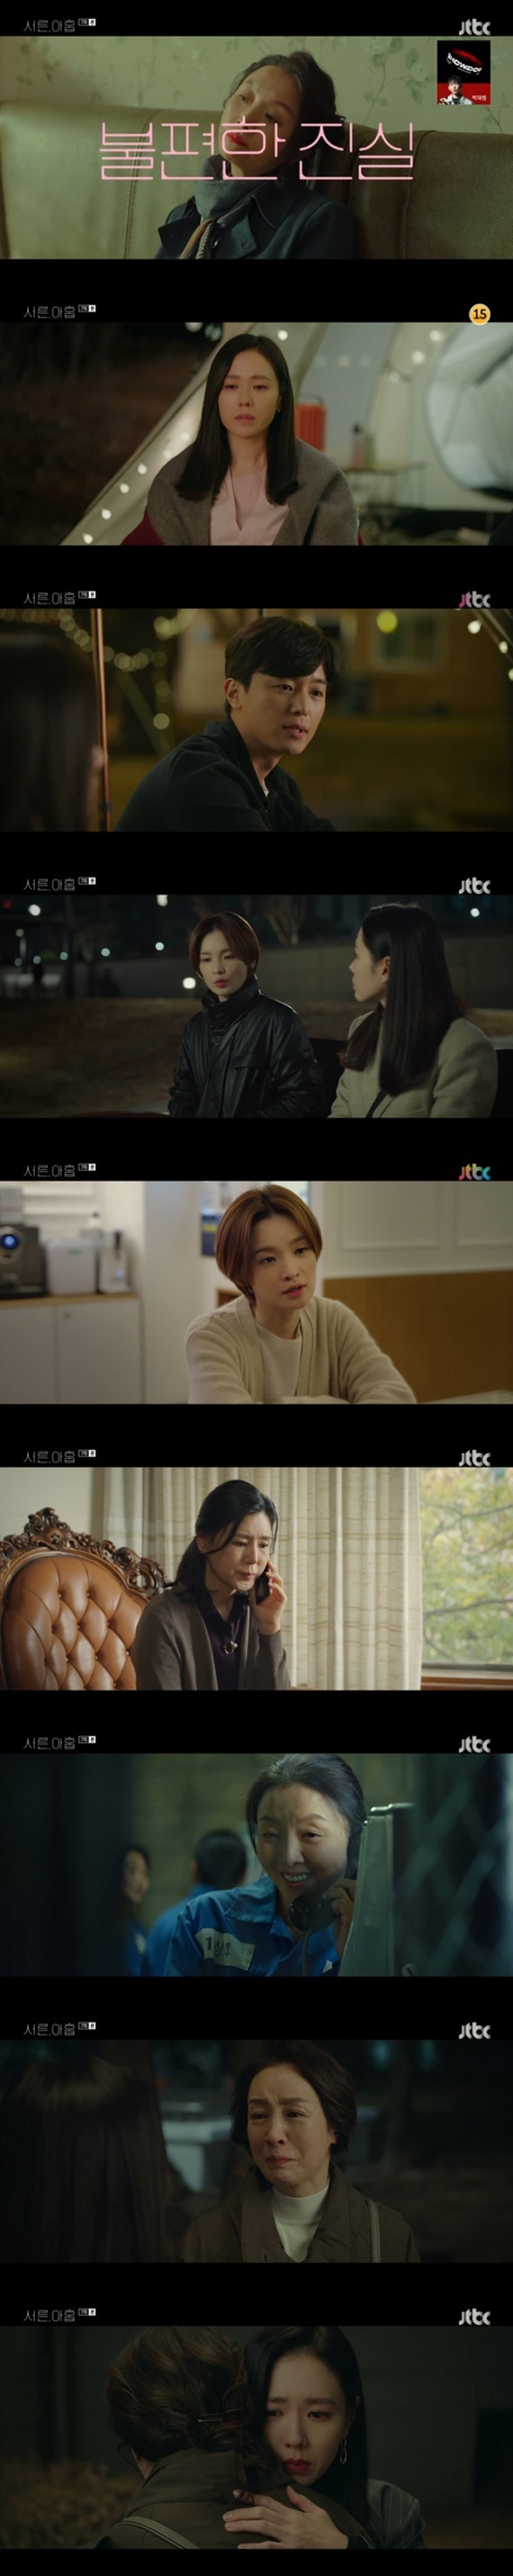 Seoul =) = Thirty, nine Son Ye-jins Your Parents have been revealed to be the current inmate.JTBCs Wednesday-Thursday Evening drama Thirty, Nine (playplayplay by Yoo Young-ah/director Kim Sang-ho) aired at 10:30 p.m. on the 16th, featured Cha Mi-jo (Son Ye-jin), who approached the identity of Your Parents.Previously, the past days of three friends who went to audition by Chung Chan-young were revealed.Cha Mi-jo (Son Ye-jin) gathered at the house of Jang Joo-hee (Kim Ji-hyun) and asked for Chung Chan-young. At that time, a questionable woman came to Jang Joo-hee mother Night modifier (South Miami) and encountered three friends.The woman said, Jimin would have been about that age, but if he resembled me, he would be pretty. Night modifier said to such a woman, You are not qualified!I left it as soon as I had a baby! He shouted, Do not come back because you almost put a person in the wrong place and you almost went to the store, you suffered from cancer because of it.In addition, I questioned the appearance that it does not seem to meet Chamijo and women.Currently, Chamijo has not been able to persuade Chung Chan-young to continue his treatment, and he has been accused of trying to make a pleasant exciting deadline.Sun-woo Kim (played by Yeon Woo-jin) worried about Cha Mi-jos self-reproach, and went to Chung Chan-young to tell him what happened with Kang Sun-ju (played by Song Min-ji).Chung Chan-young was fortunate to have Sun-woo Kim next to Cha Mi-jo and asked, Please play with Mizo.Chung Chan-young told Chamijo that your parents worked in Silomam Breakfast, but Chamijo did not take the words of Chung Chan-young, saying that Night modifier could not lie.A questionable woman who had visited Night modifier in the past was serving a sentence in prison, and a picture of Cha Mi-jos mother, Yeon Jung-hwa (Lee Kan-hee), asking her how she said Jimin was revealed.Chamijos original name was Jimin, and the woman was shocked by the fact that she was the birth mother of Chamijo.Then the Night modifier burst into tears, saying to Chamijo, who is wondering about the identity of your parents, Im sorry, Mizo, I know your parents.Cha Mi-jo held the bleating Night modifier in silence.On the other hand, JTBC Wednesday-Thursday Evening drama Thirty, Nine is a real human romance drama that deals with the friendship, love and in-depth story of three friends who are about forty days in front of them. It is broadcast every Wednesday and Thursday at 10:30 pm.